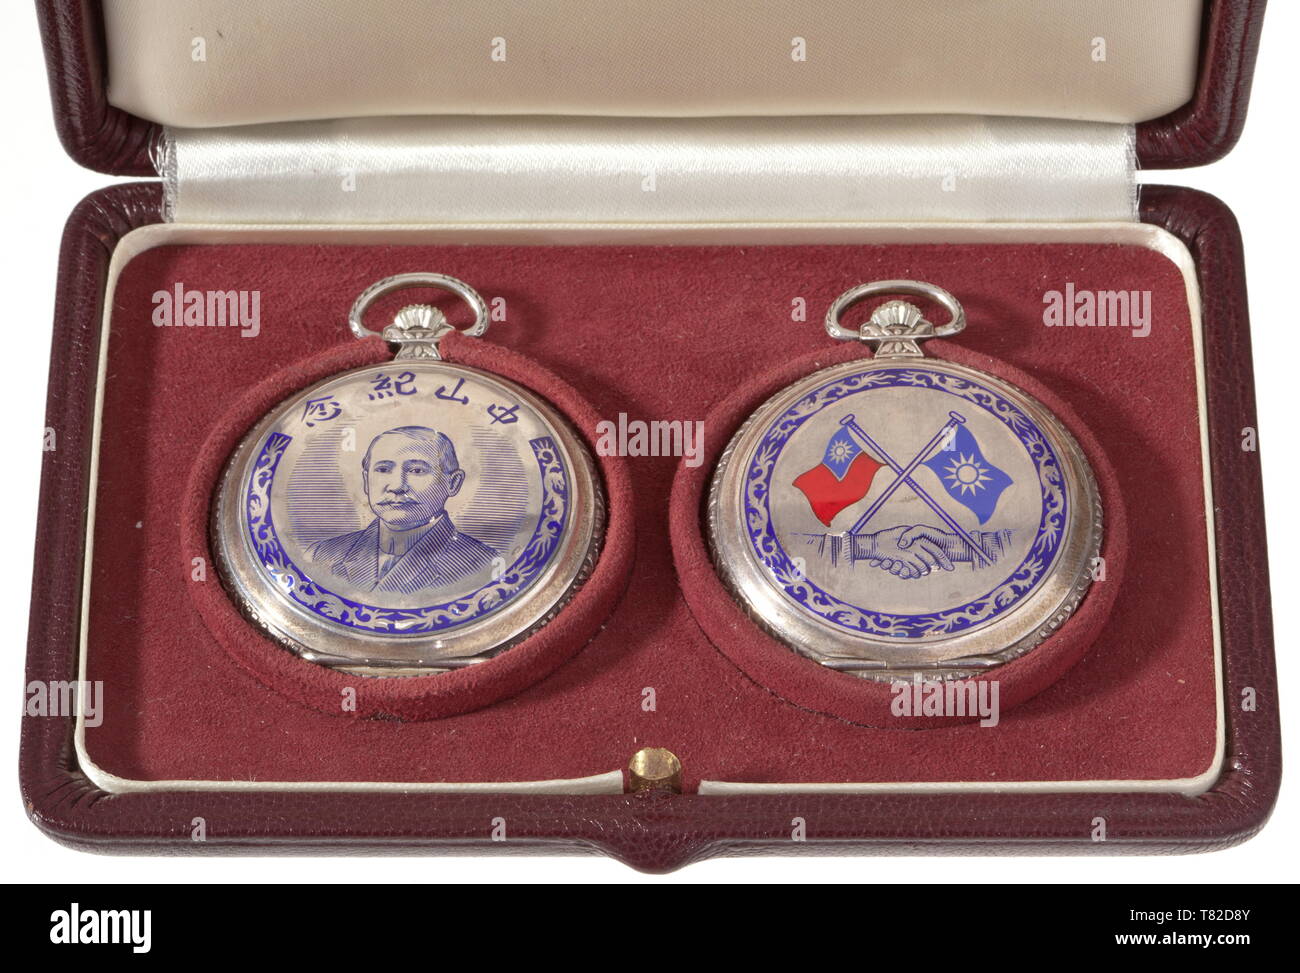 Walter Stennes (1895 - 1989) - Ernst Ramm. Two presentation pocket watches from the Koumintang military advisor to the head of the German consulate. The watches made of silver. The hunter cases inlaid with enamel and portraits of Chaing Kai-Shek, a motto scroll, and dragon decoration (minimal damage to the enamel on both watches). The back covers inlaid with enamel flags of the Koumintang and the Republic of China. The inside of the covers with manufacturer's inscription 'Magno', '925', and various hallmarks. Chinese characters on the enamel dials. In the presentation case., Editorial-Use-Only Stock Photo